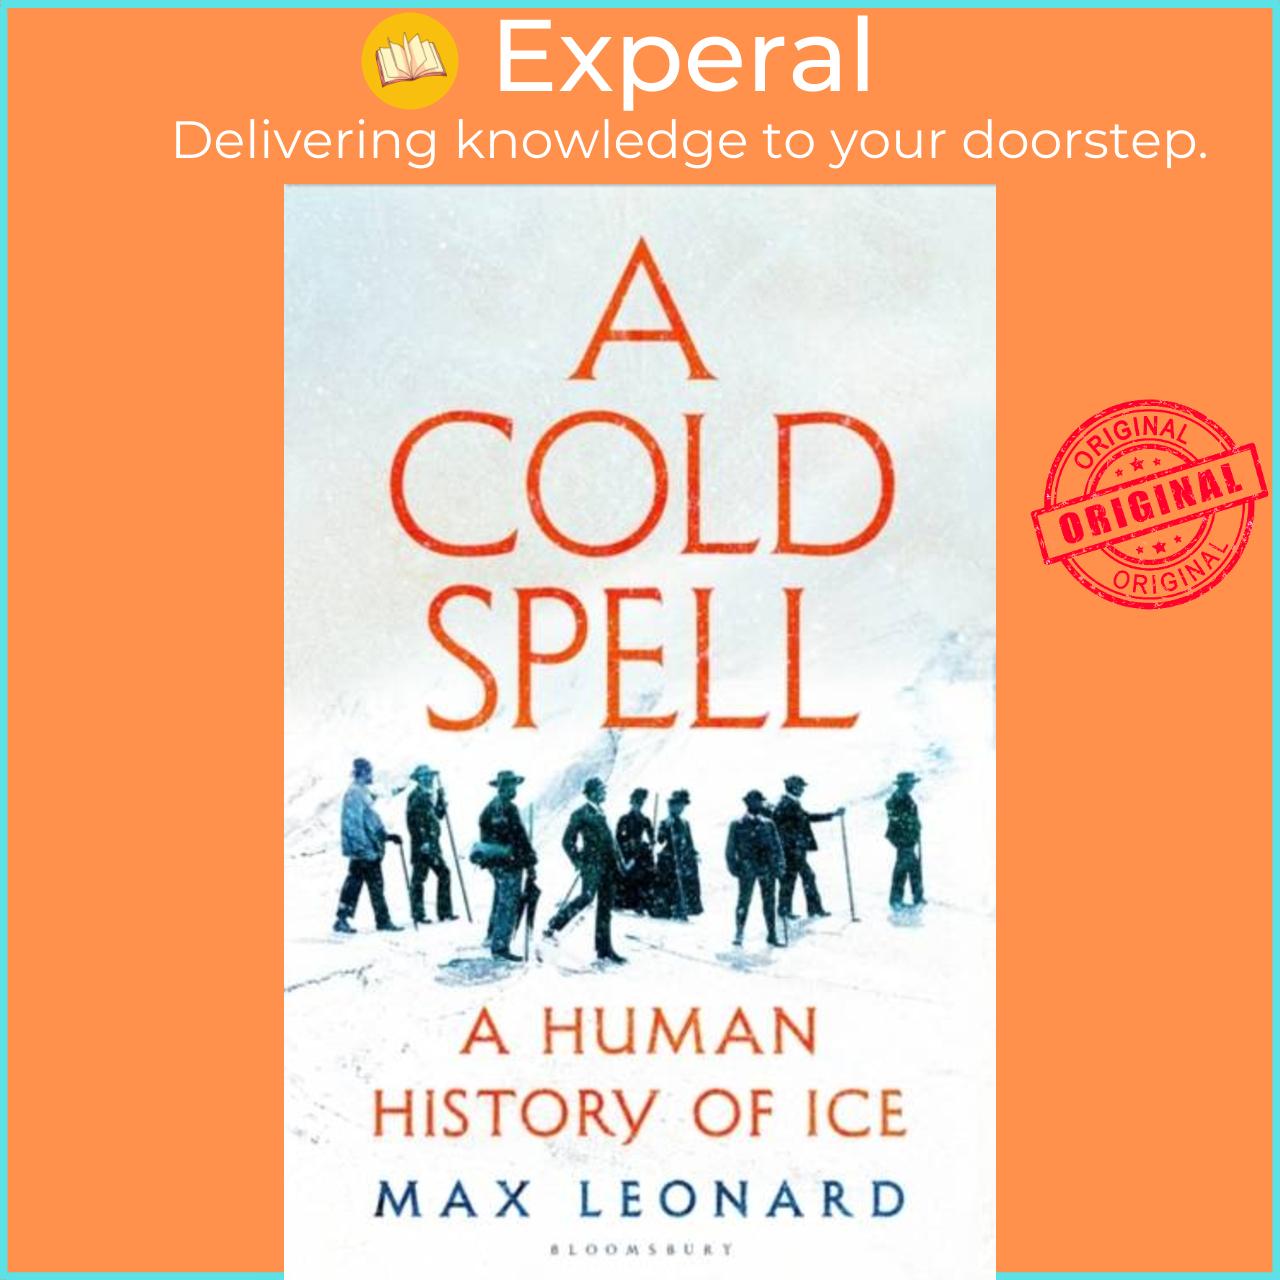 Sách - A Cold Spell - A Human History of Ice by Max Leonard (UK edition, hardcover)